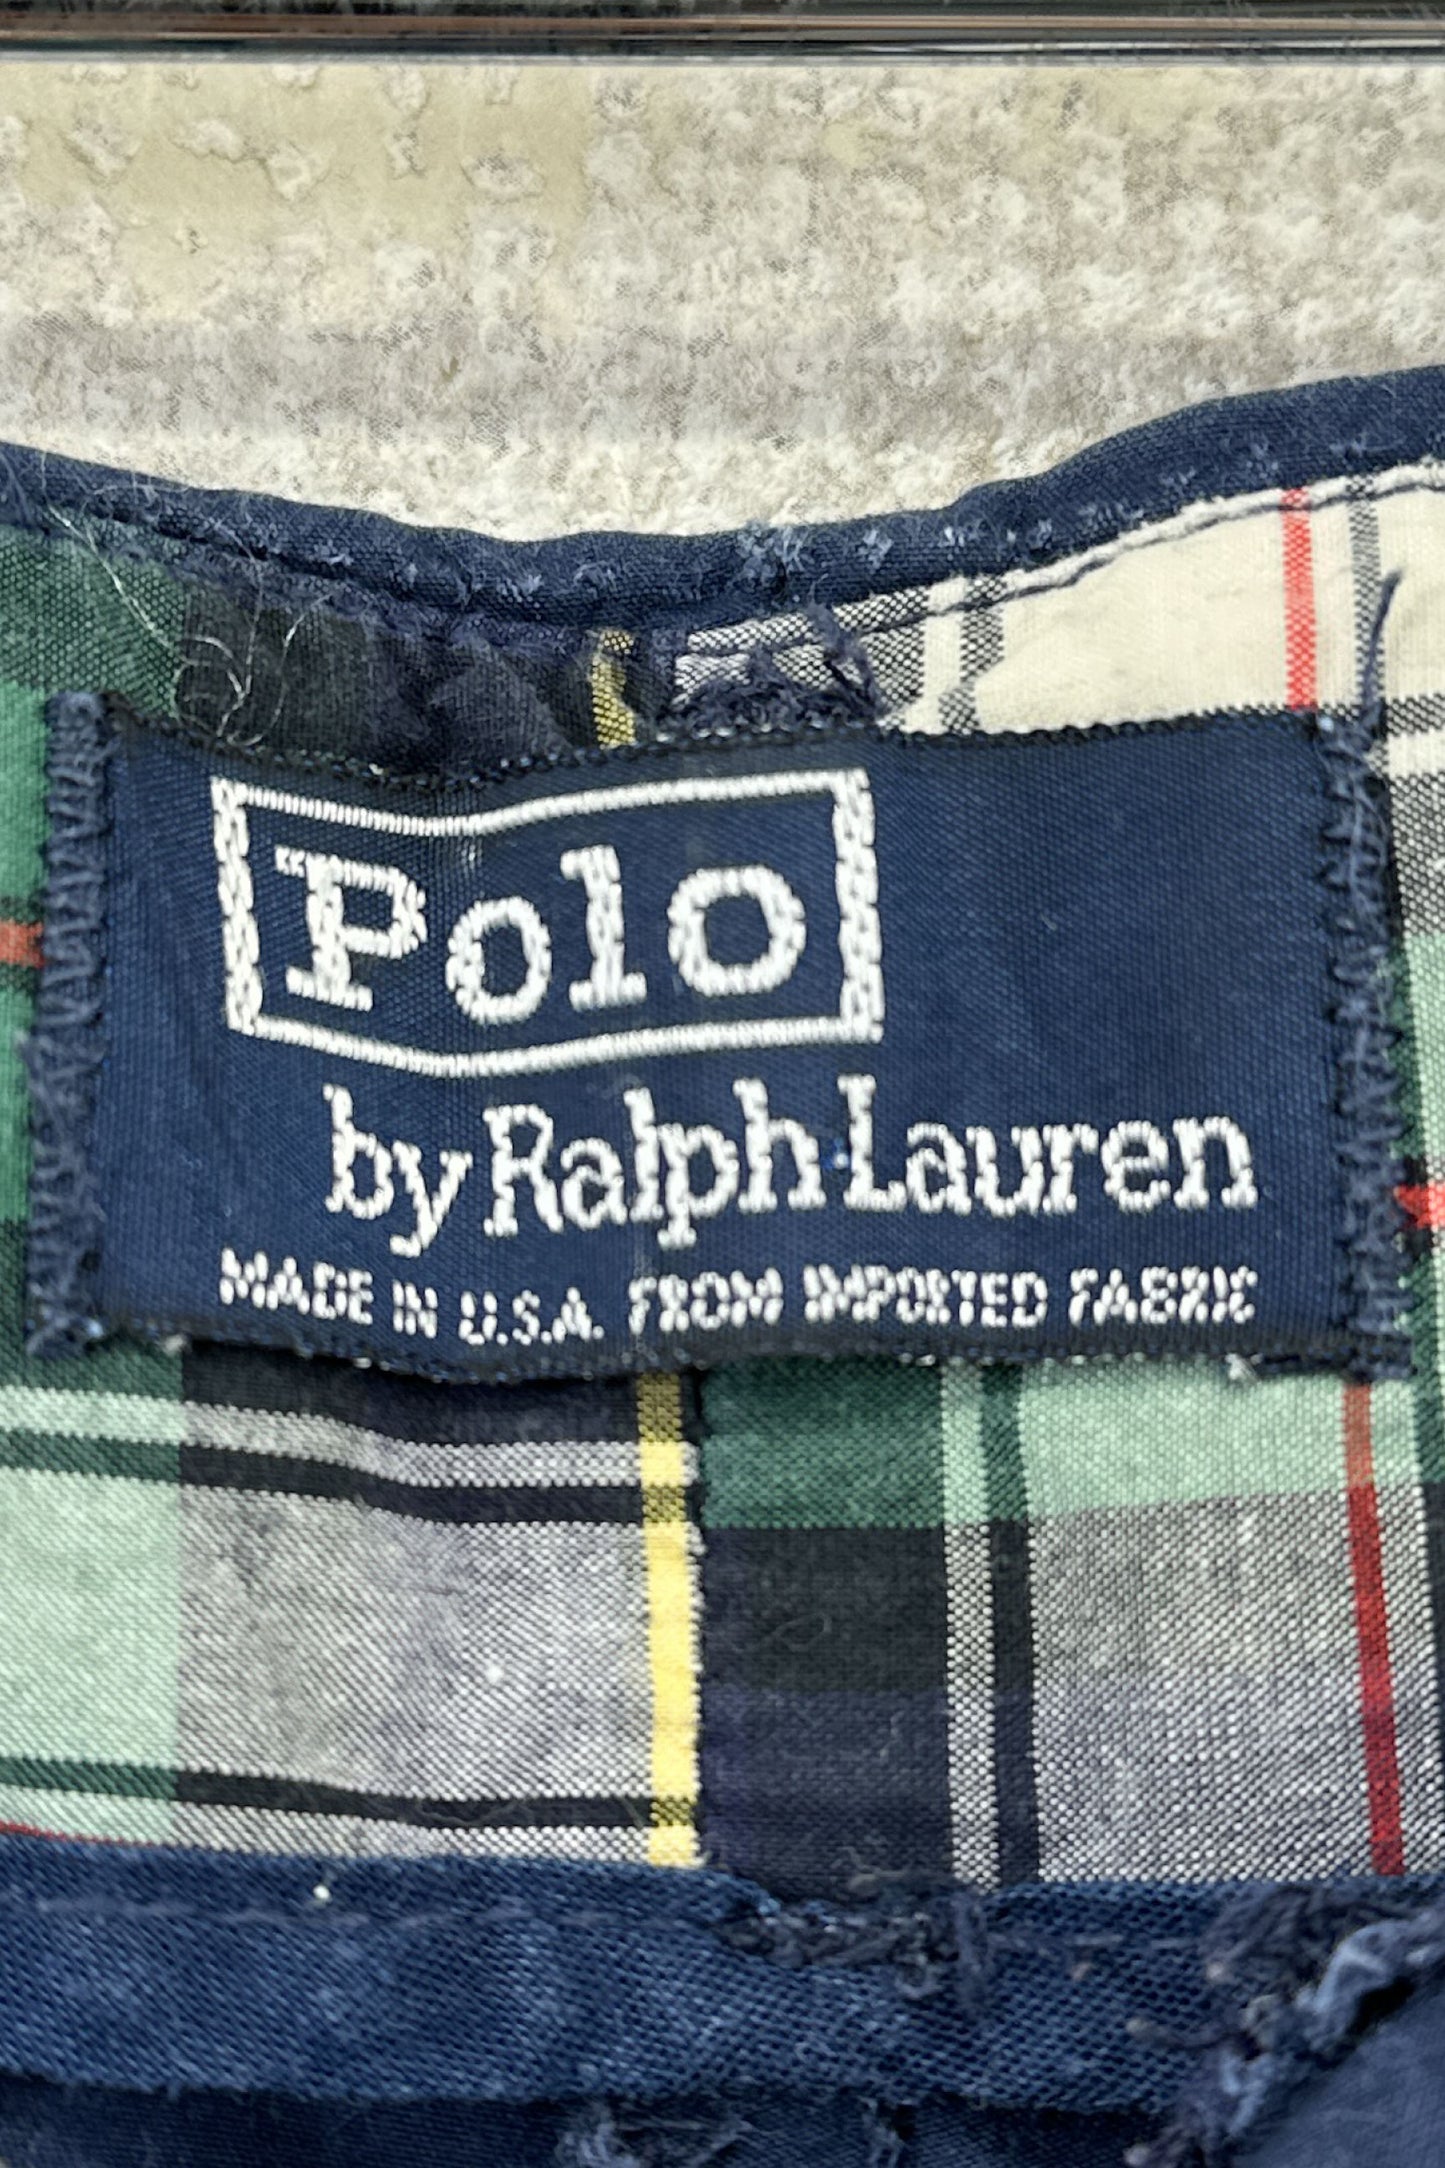 Made in USA POLO RALPH LAUREN blue pants